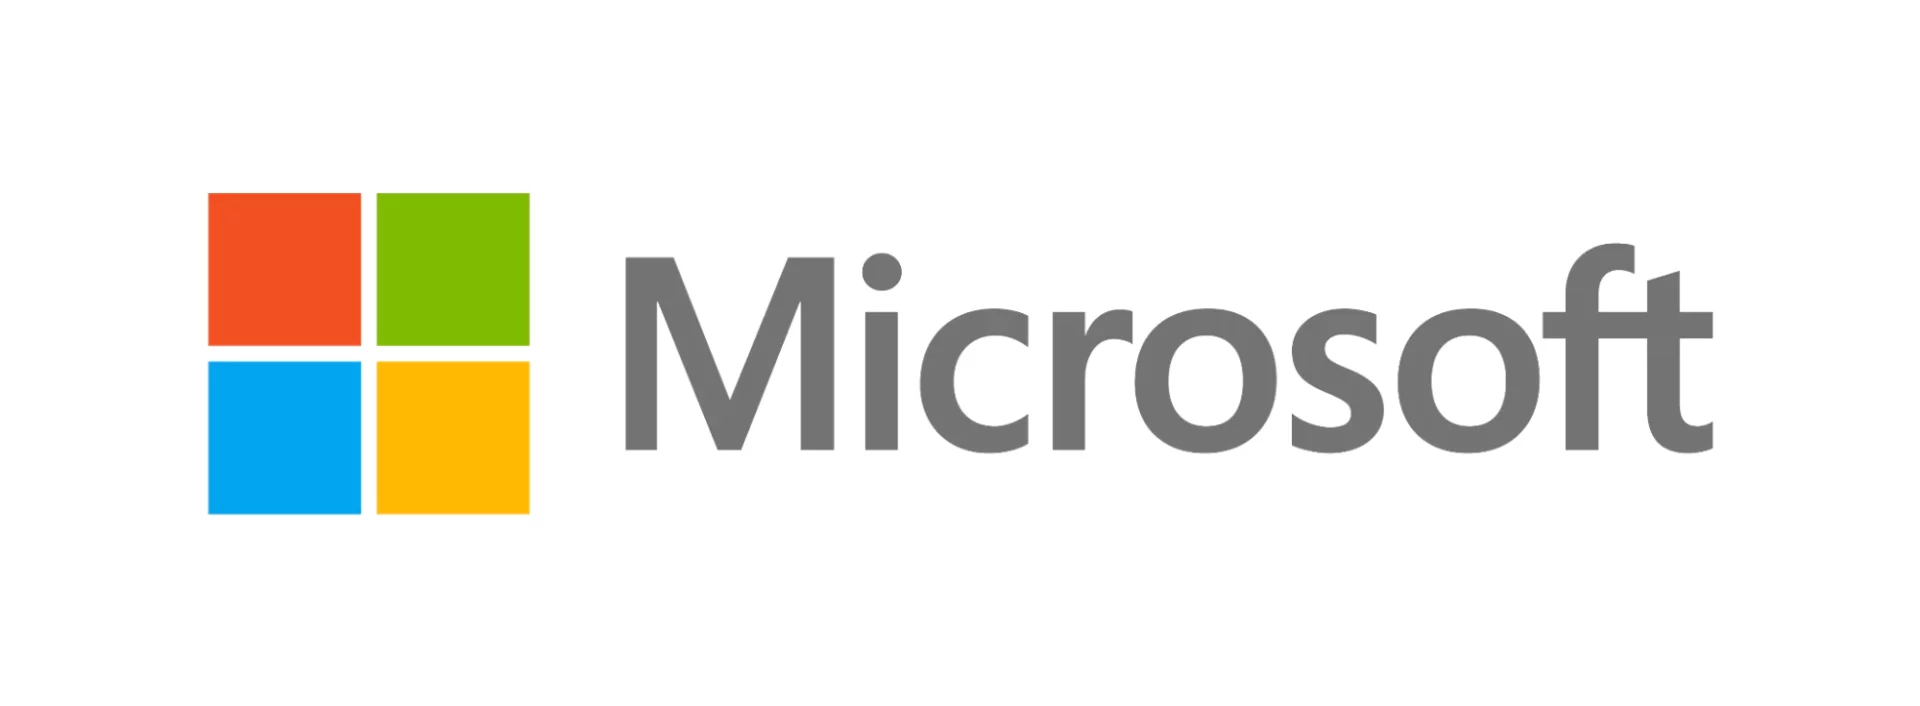 Microsoft logo, a four-pane colored window in blue, green, yellow, and red